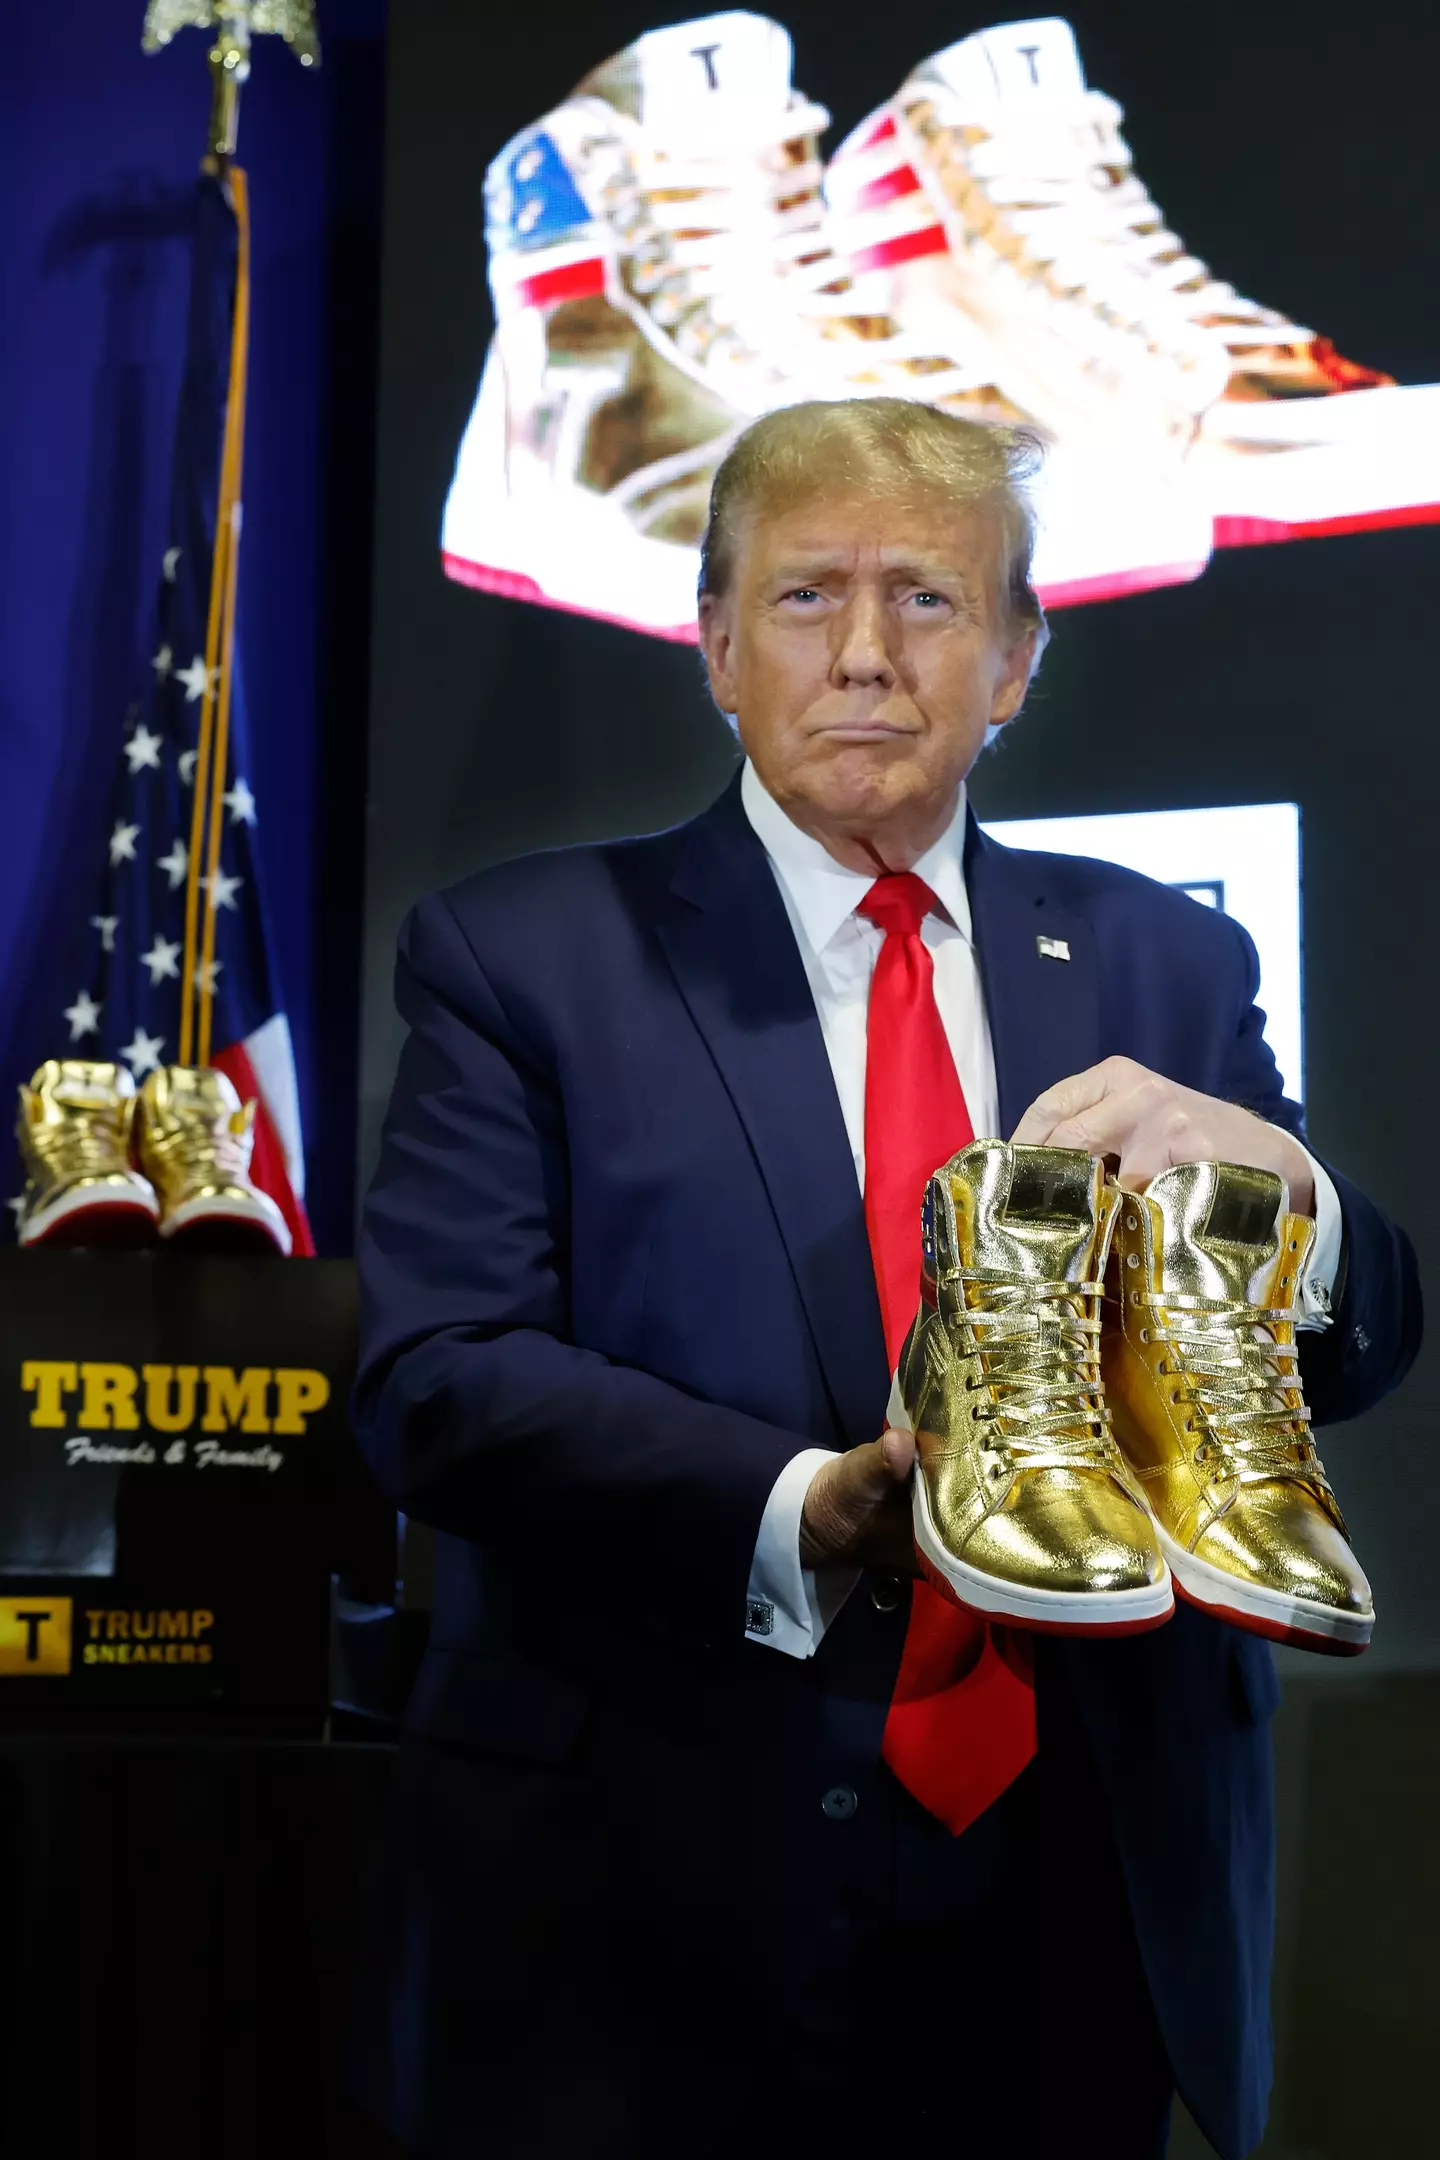 The shoes will set you back $399 a pair.